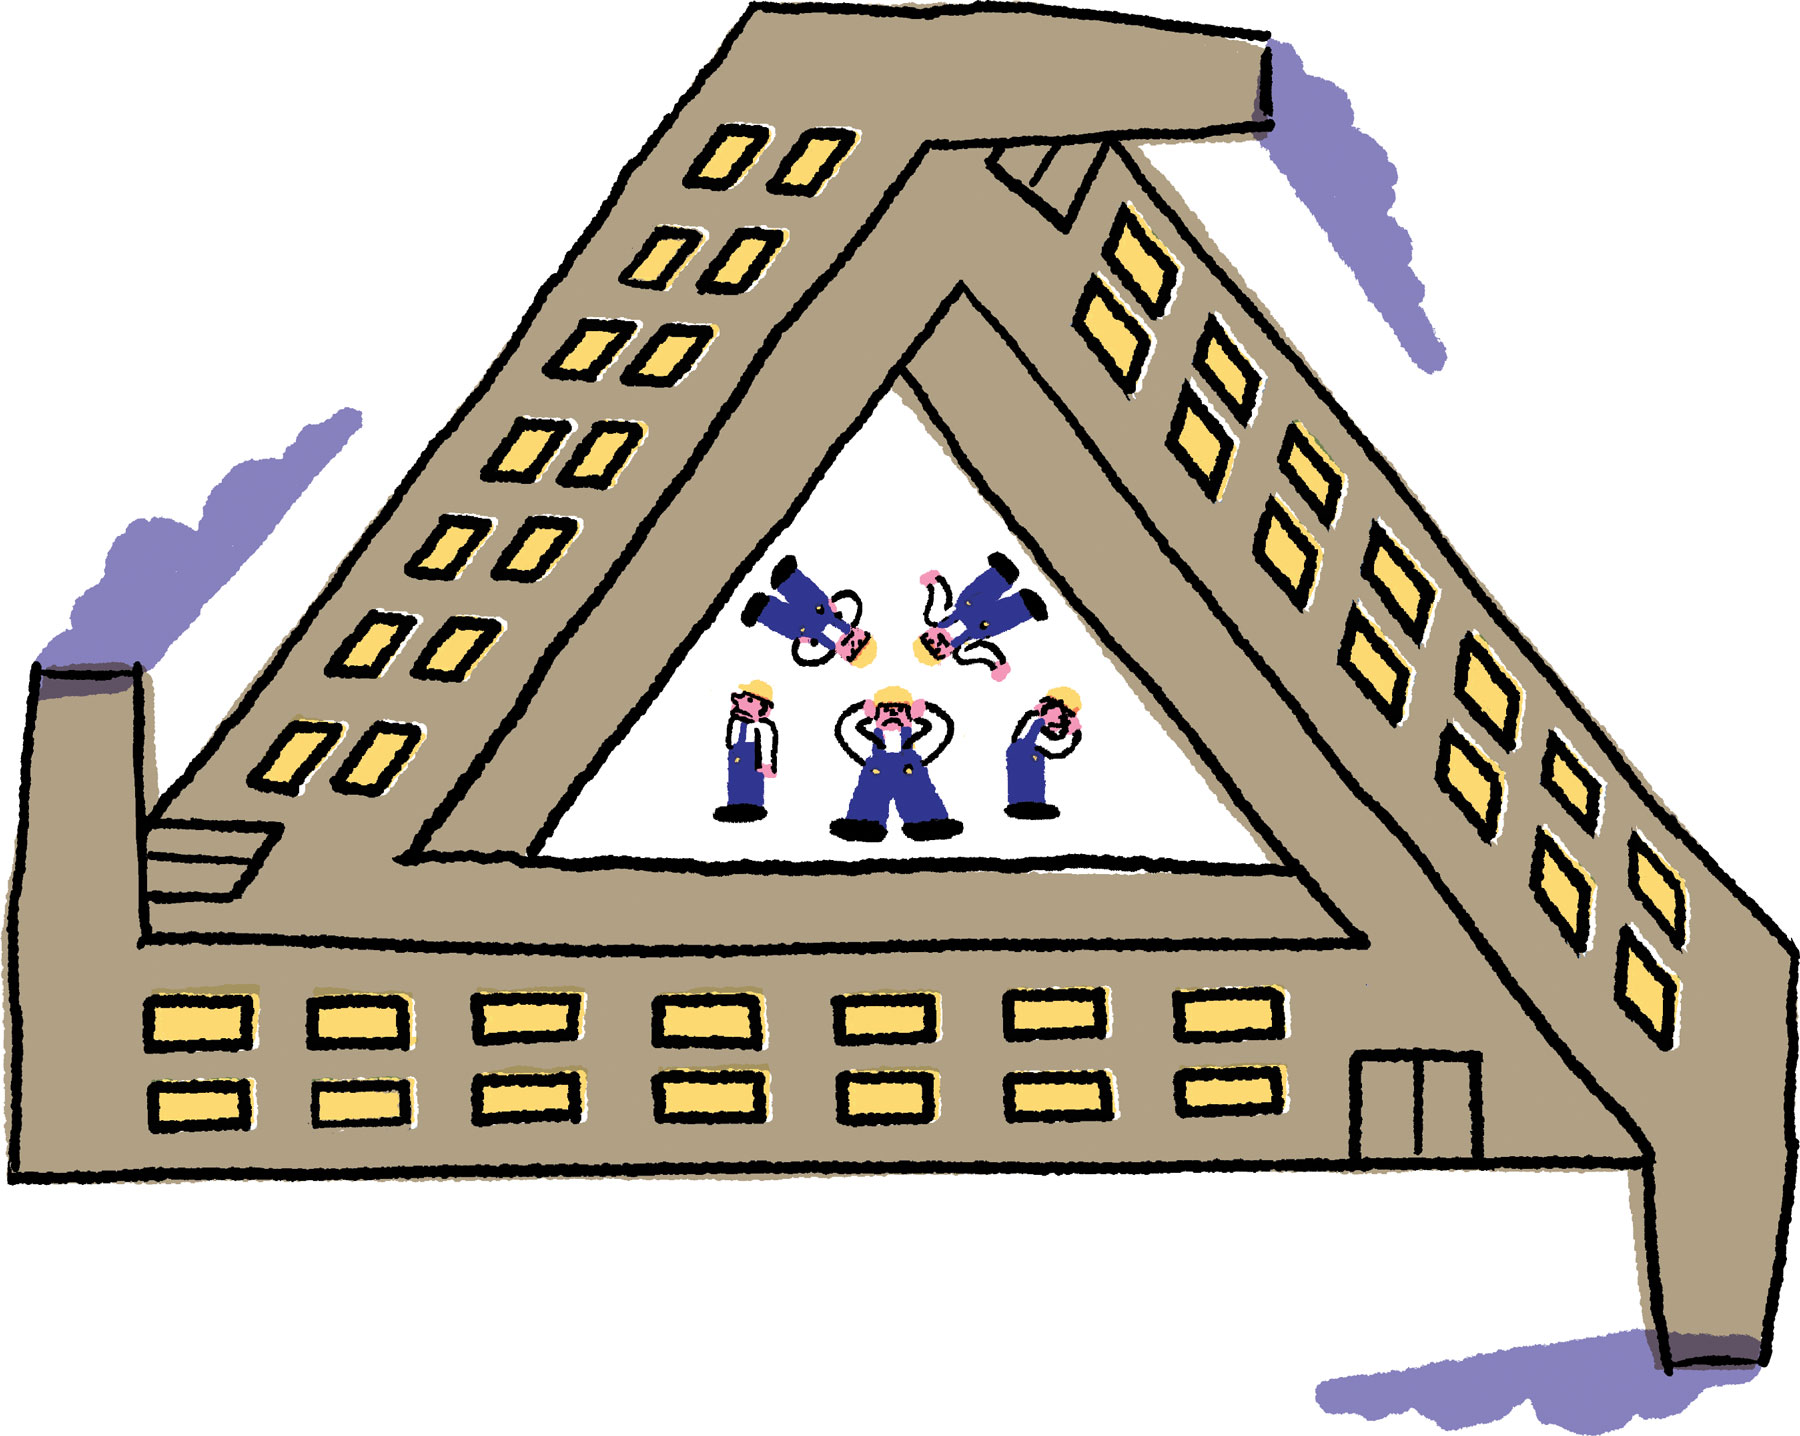 Illustration of workers trapped in the atrium of a building